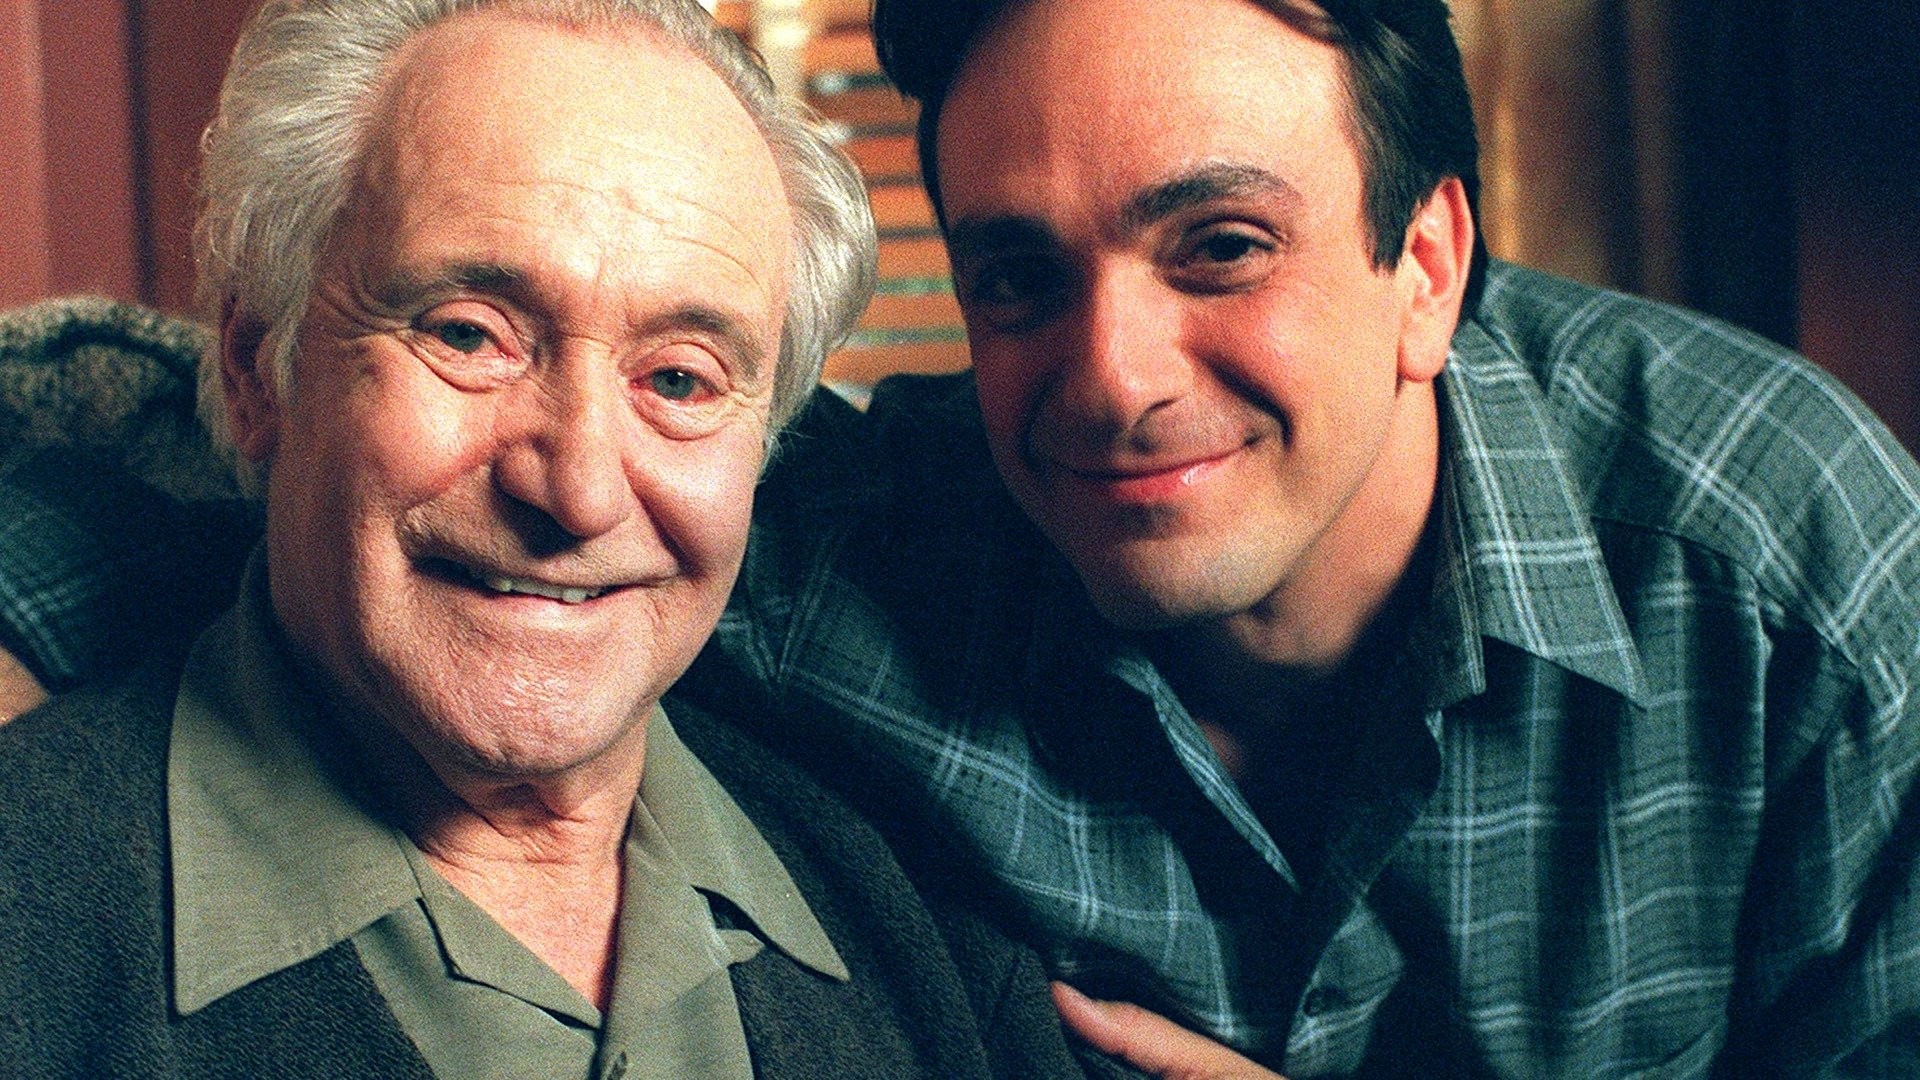 Tuesdays With Morrie - Rotten Tomatoes